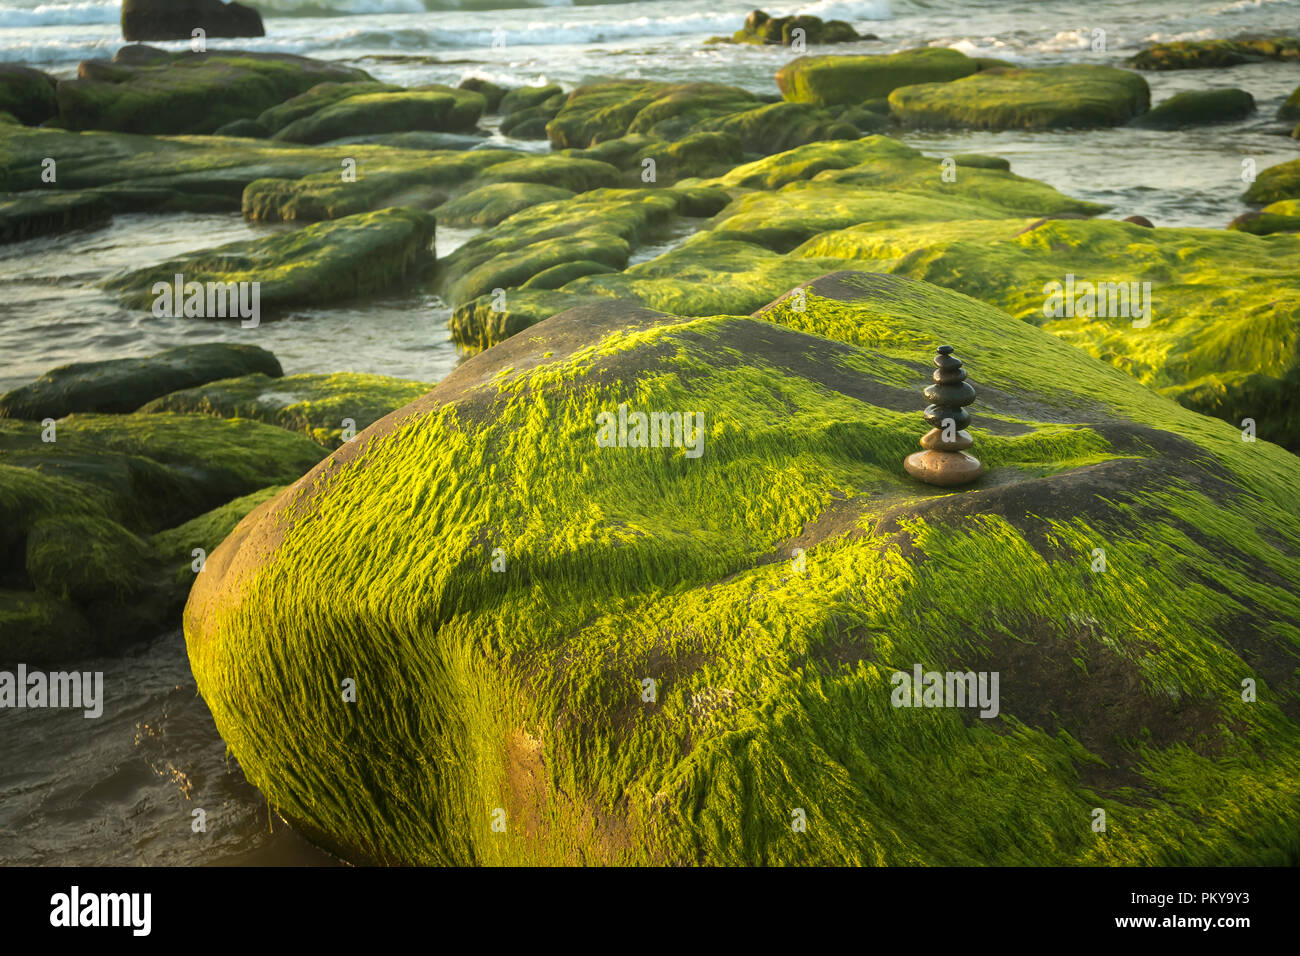 An amazing stack of stones on green moss at the seaside beach Stock Photo